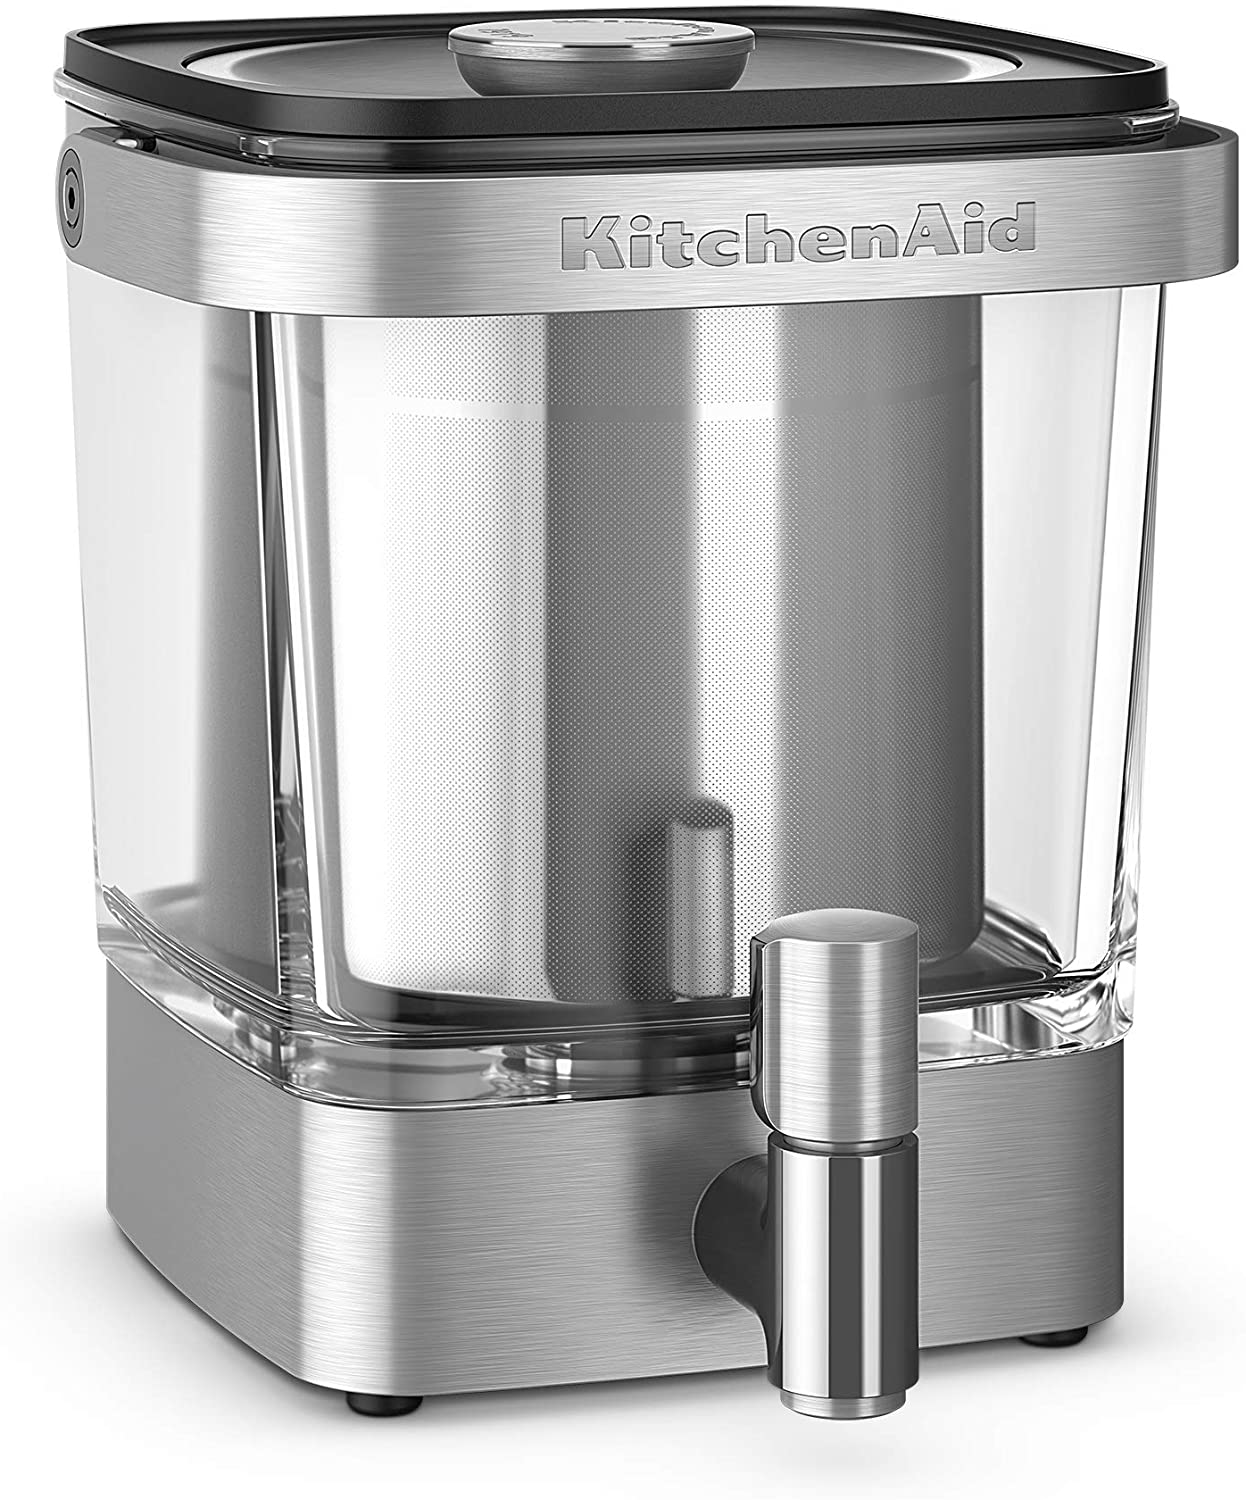 Review of KitchenAid KCM5912SX Cold Brew Coffee Maker 38 Ounce Brushed Stainless Steel